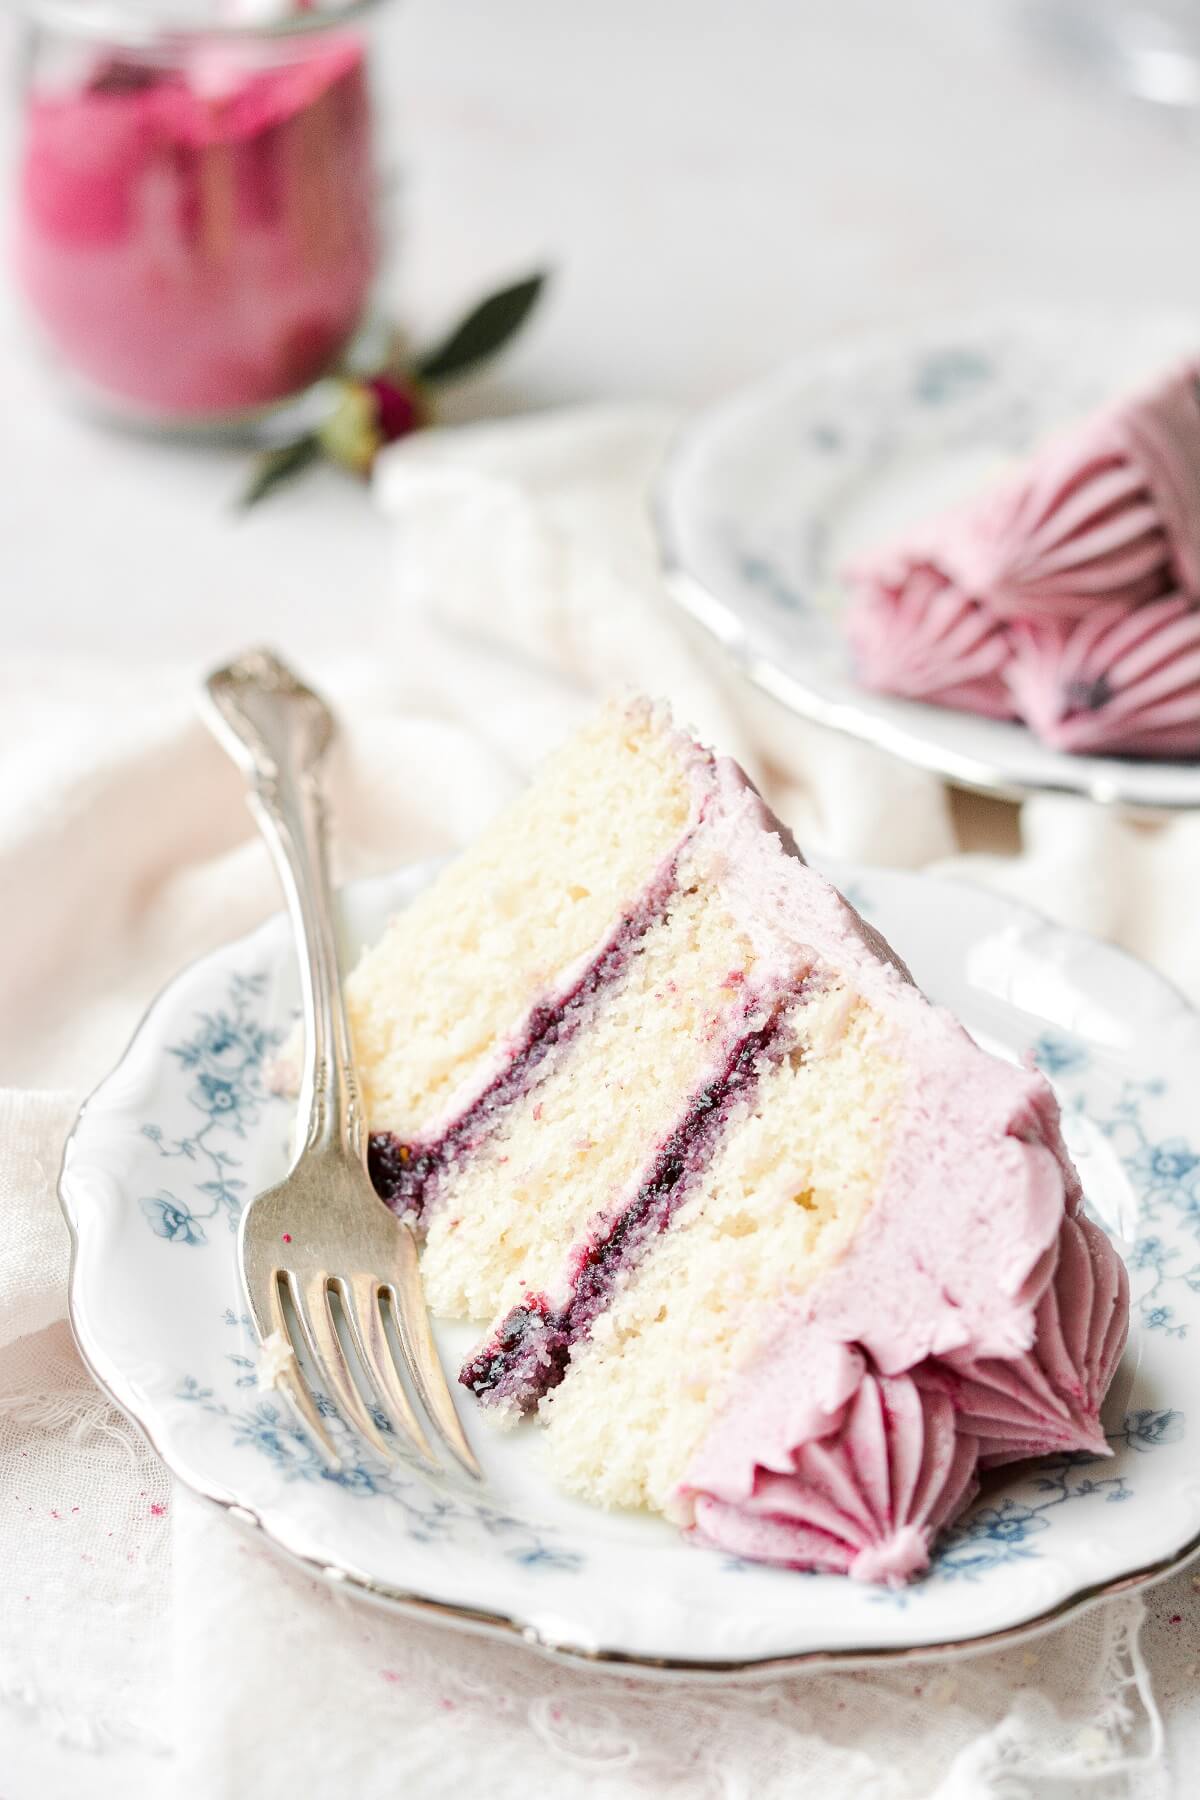 Slices of vanilla cake with blueberry jam filling and blueberry buttercream.